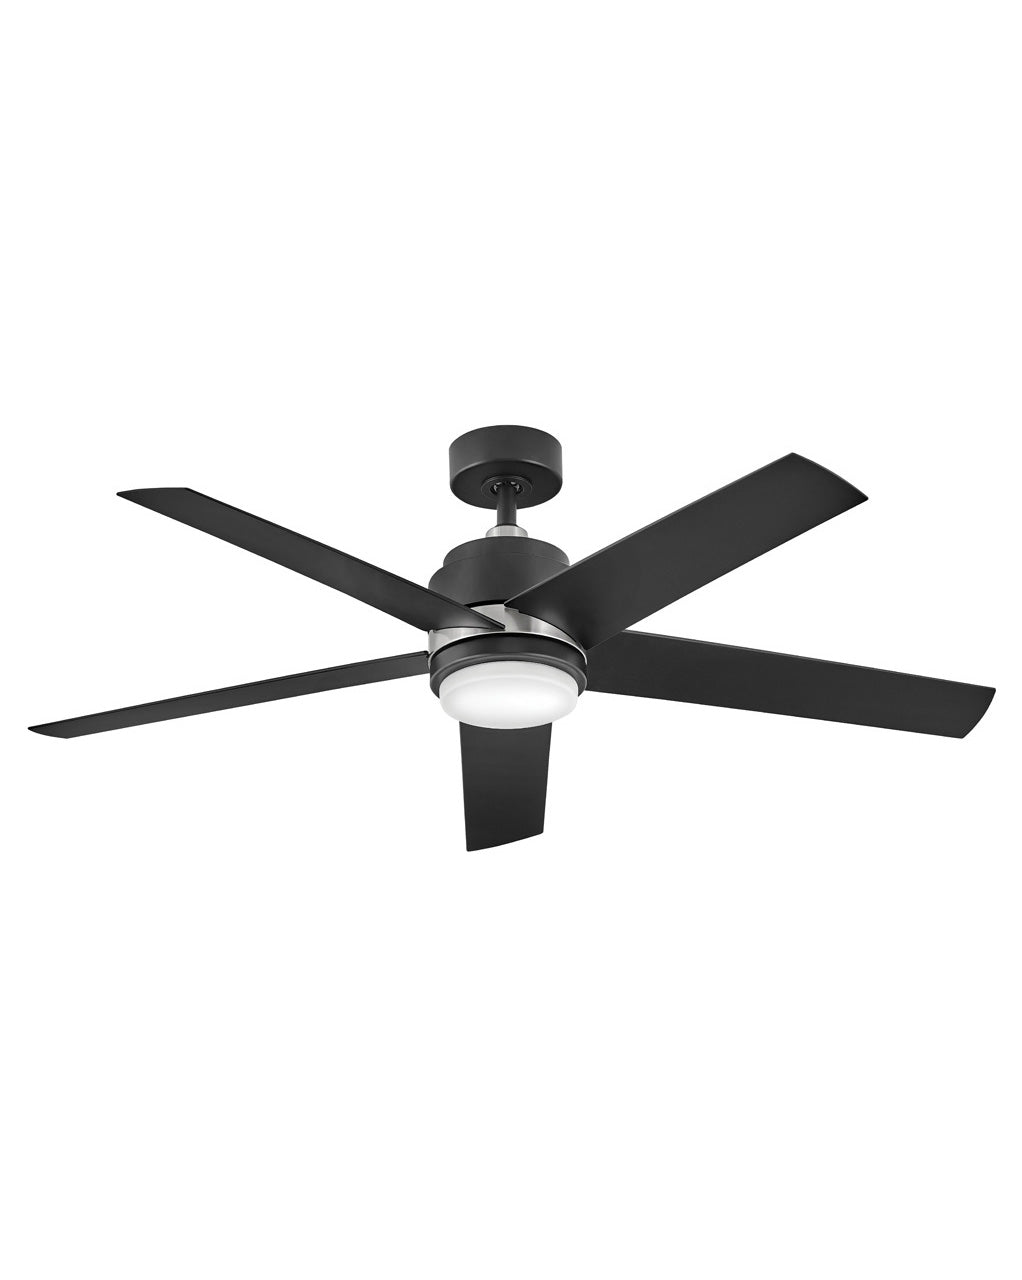 Hinkley Tier 54" LED 902054 Ceiling Fan Hinkley Matte Black with brushed nickel accent  